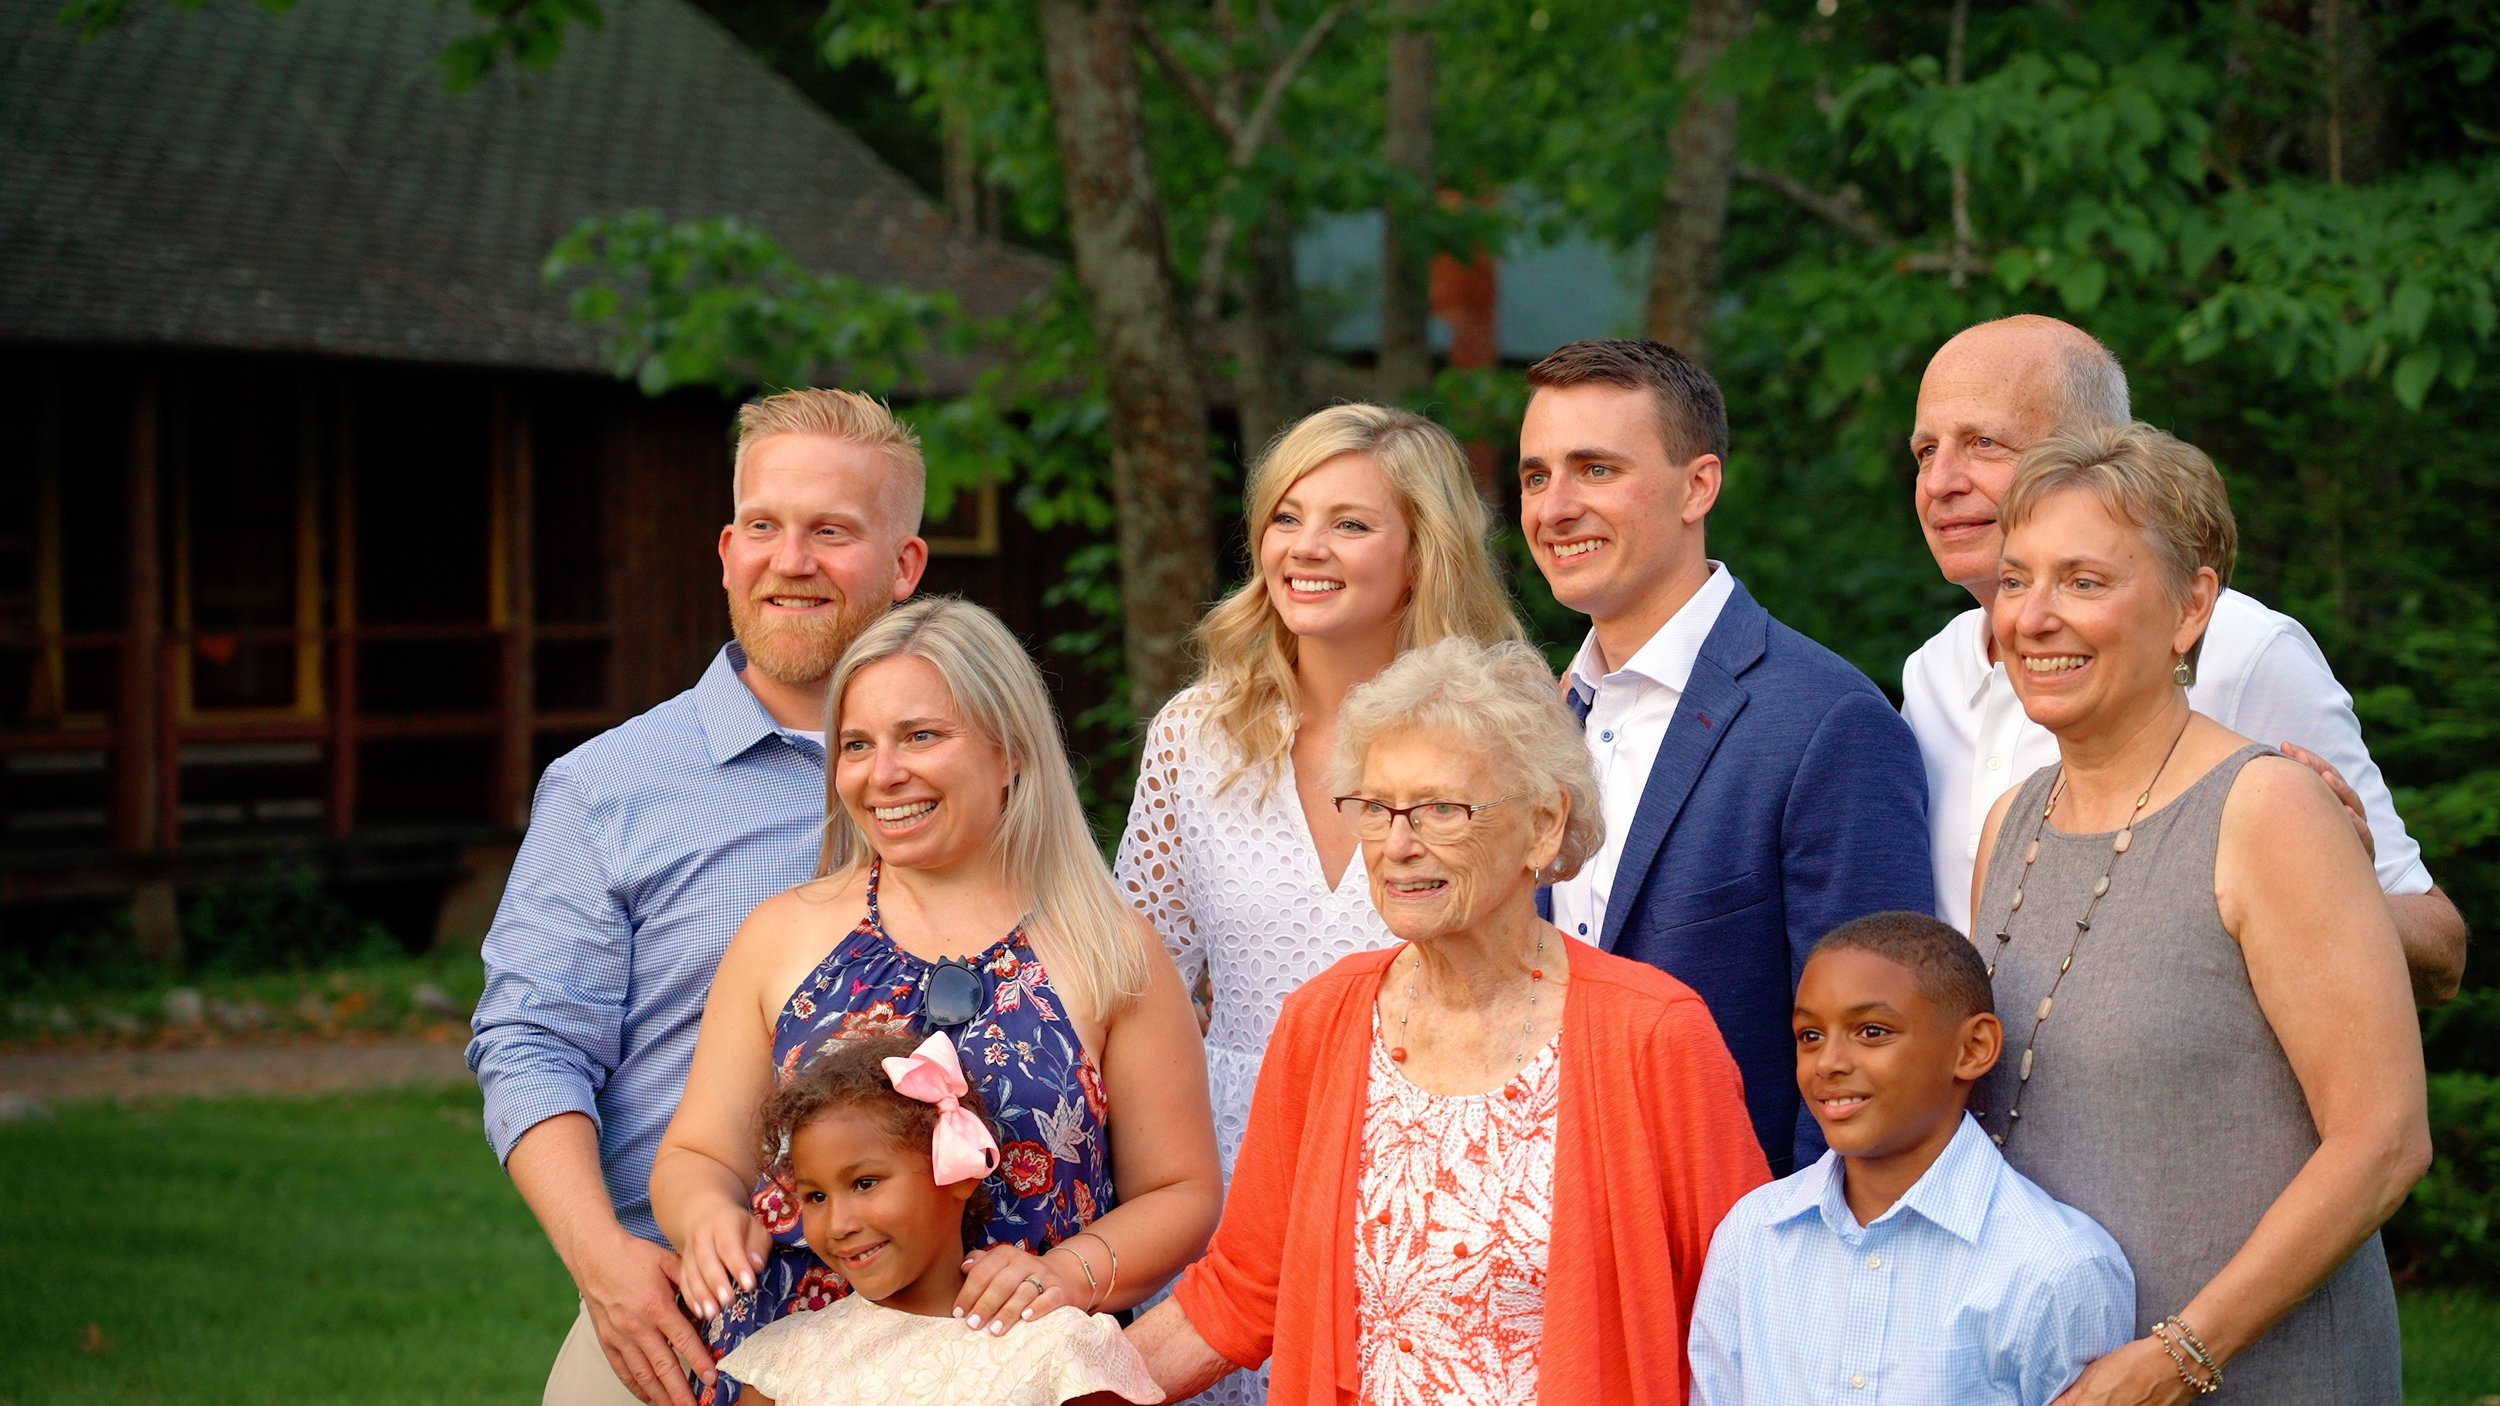 Family photo session at rehearsal dinner